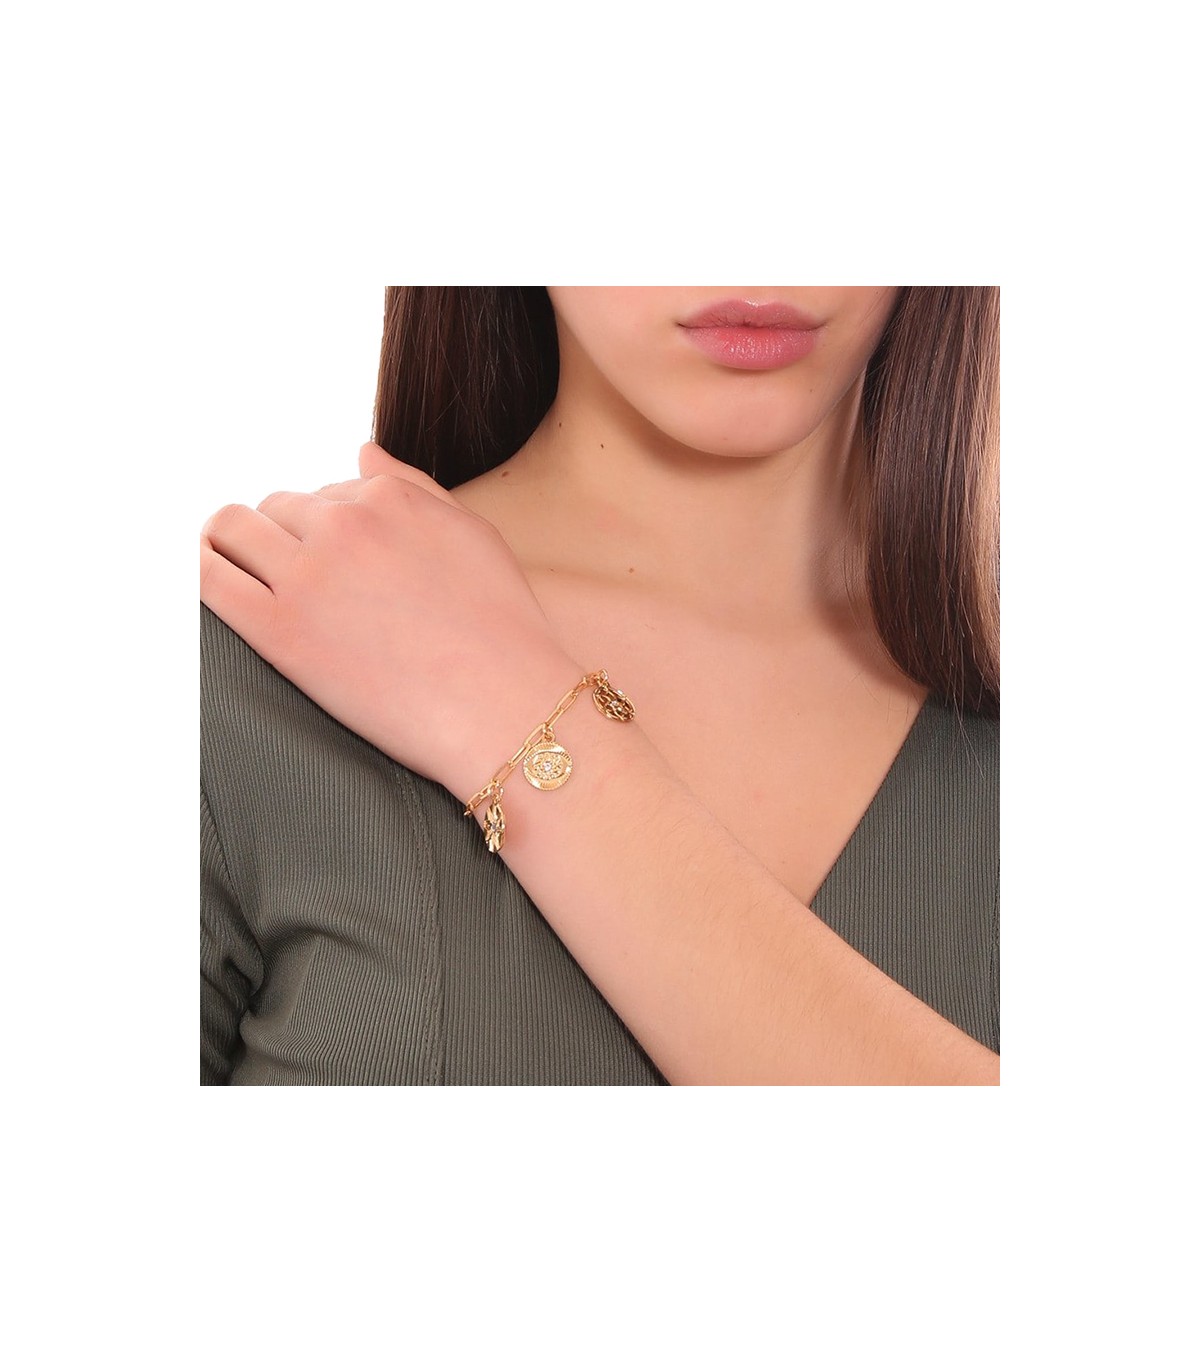 Dropship Gold Plated Bangle Bracelets For Women With Swarovski Crystals  Infinity Charm Cuff Bracelets Birthday Gift For Girls to Sell Online at a  Lower Price | Doba